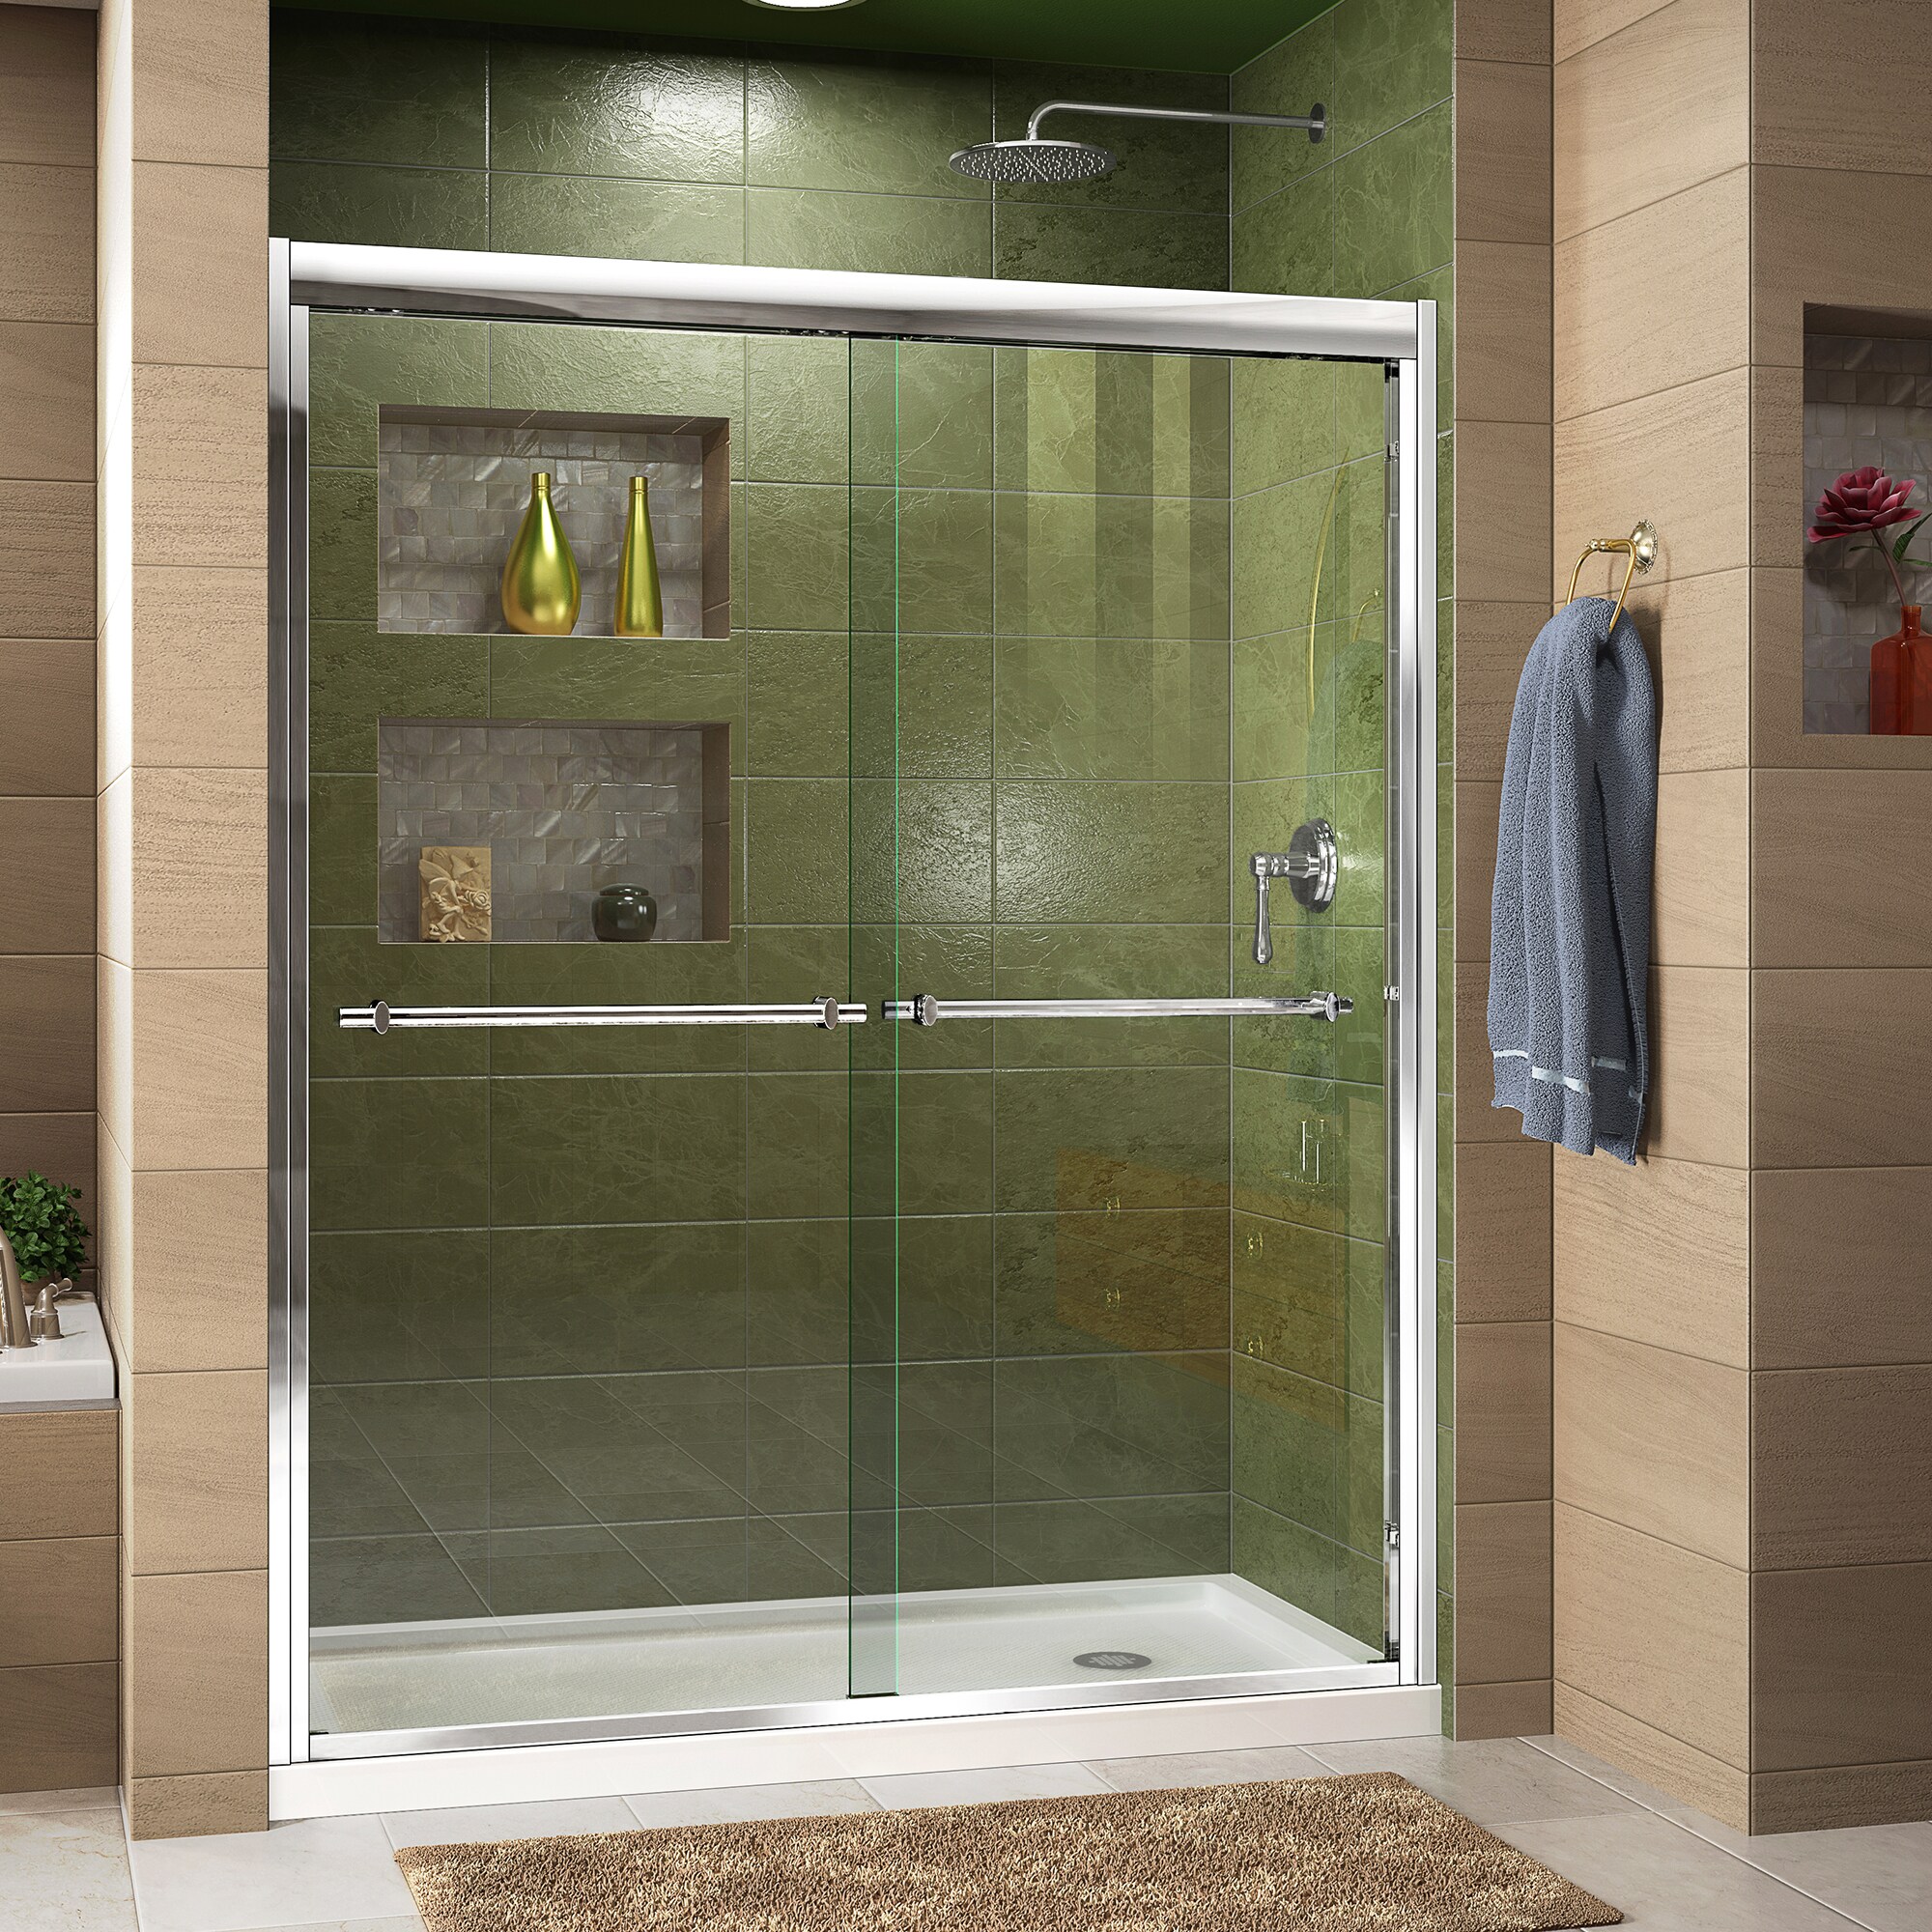 DreamLine Duet Biscuit 2-Piece 30-in x 60-in x 75-in Rectangular Alcove Shower Kit (Right Drain) with Base and Door Included